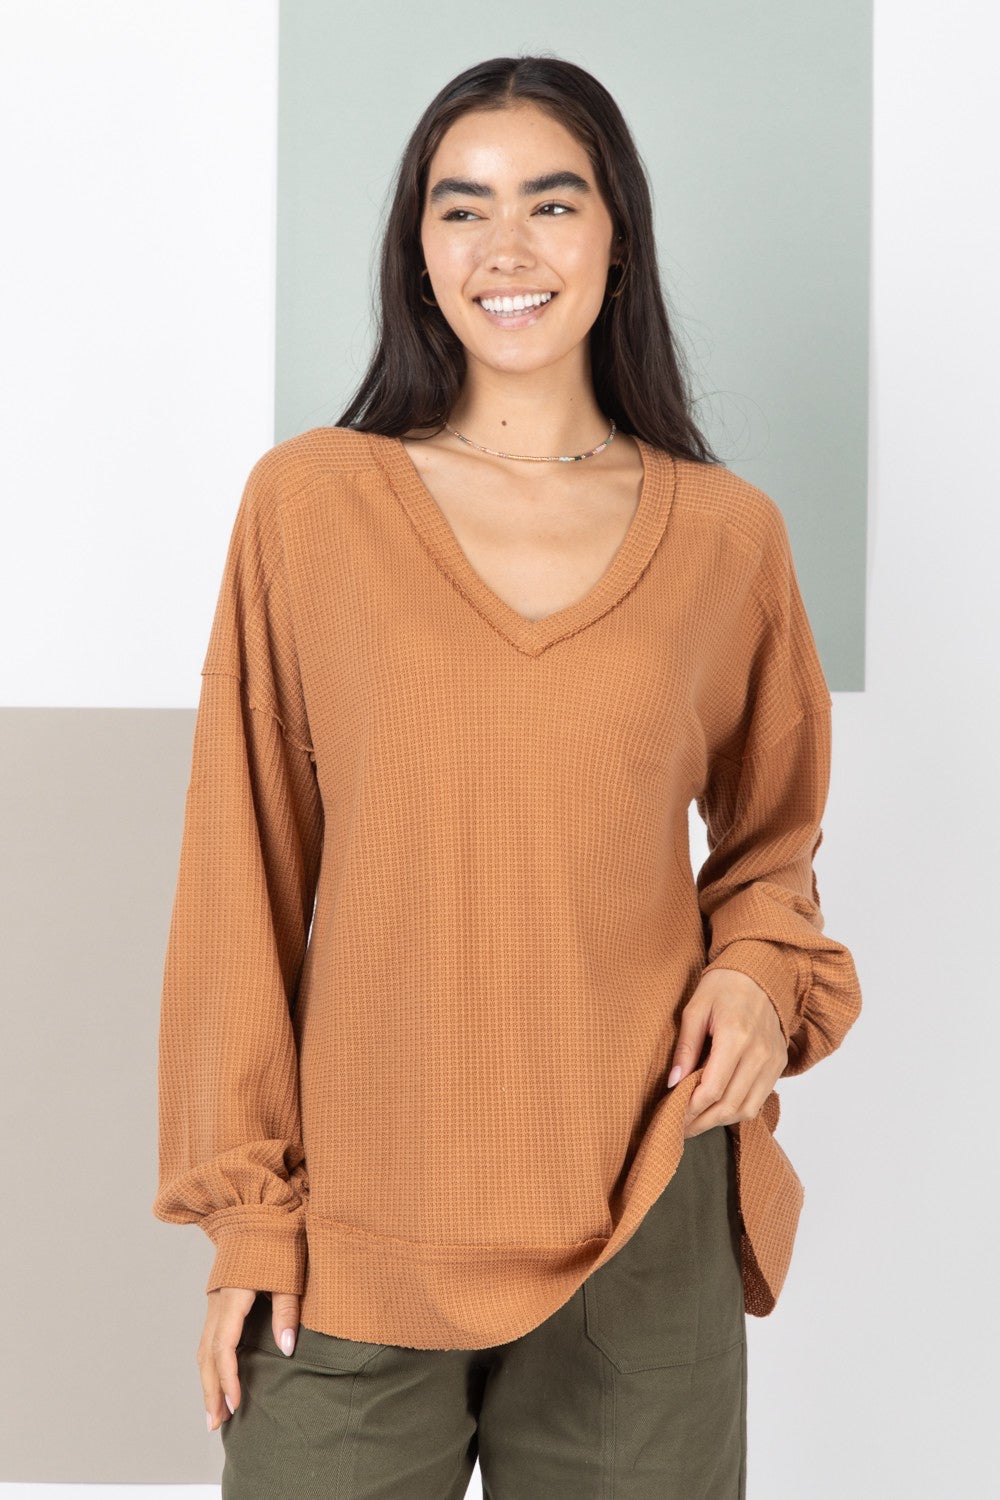 THREE COLORS - The Everything Elbow Patched Casual Knit Top